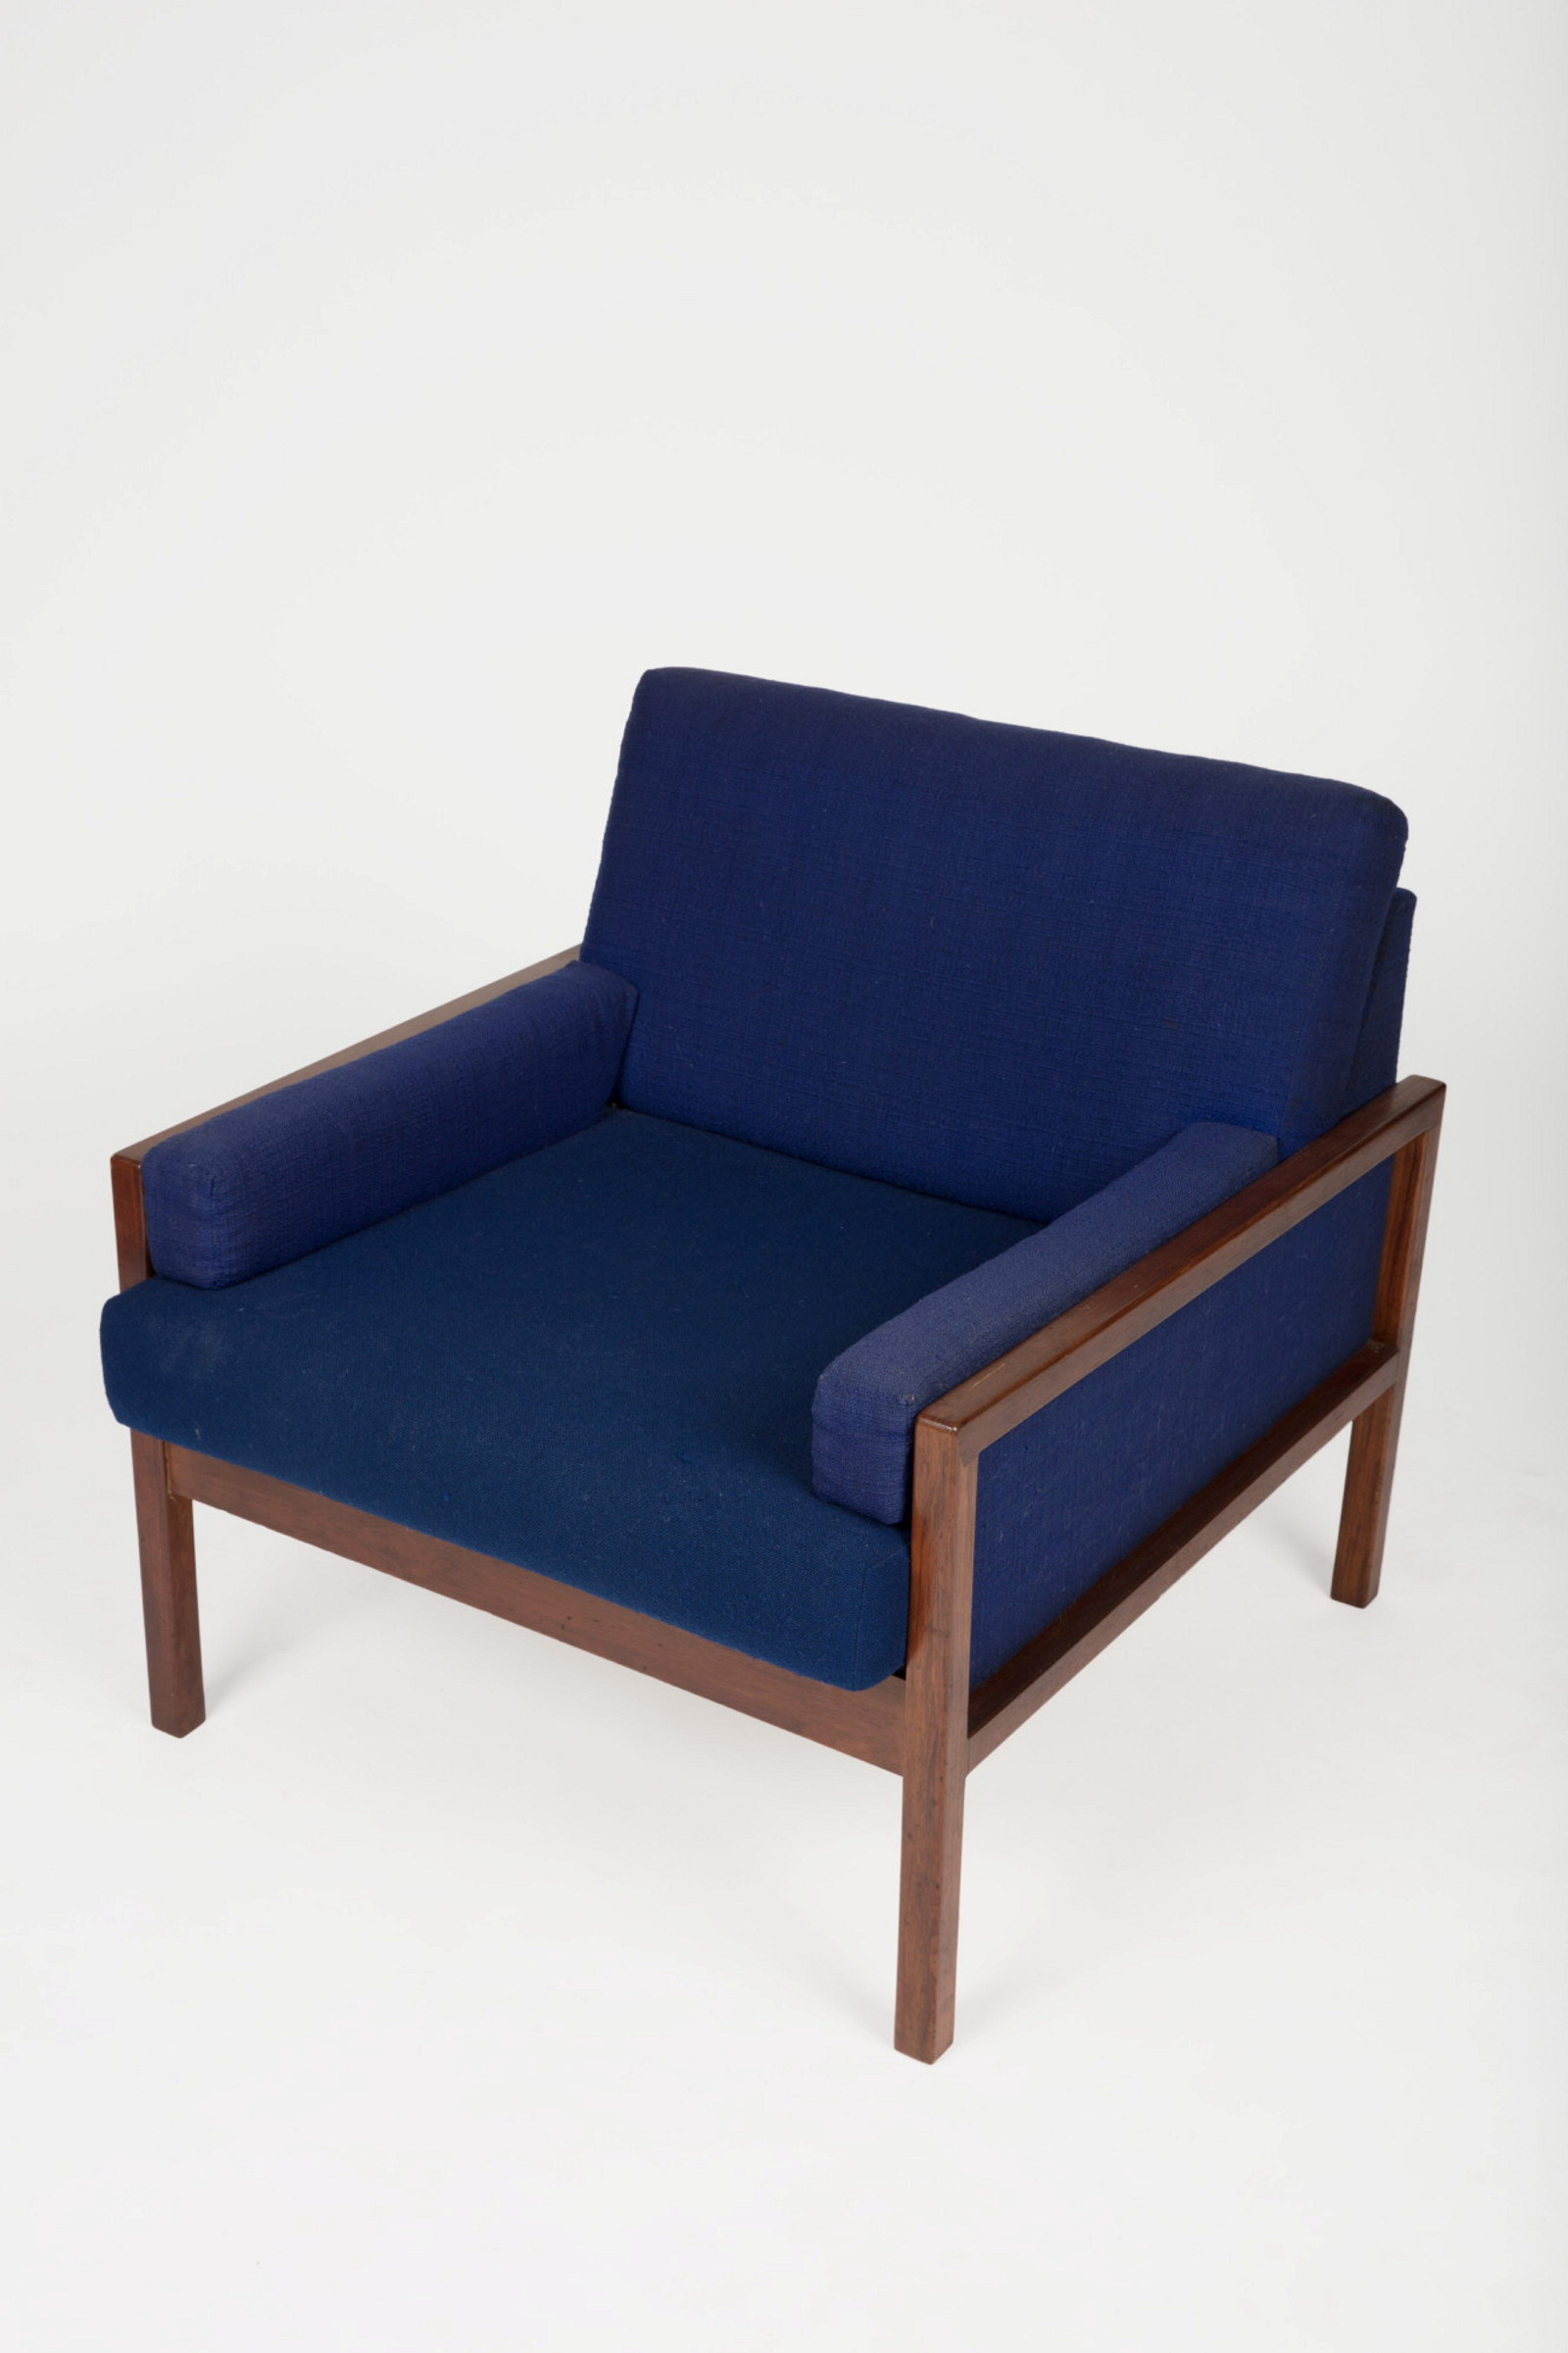 Easy chair with blue wool upholstery and wooden frame